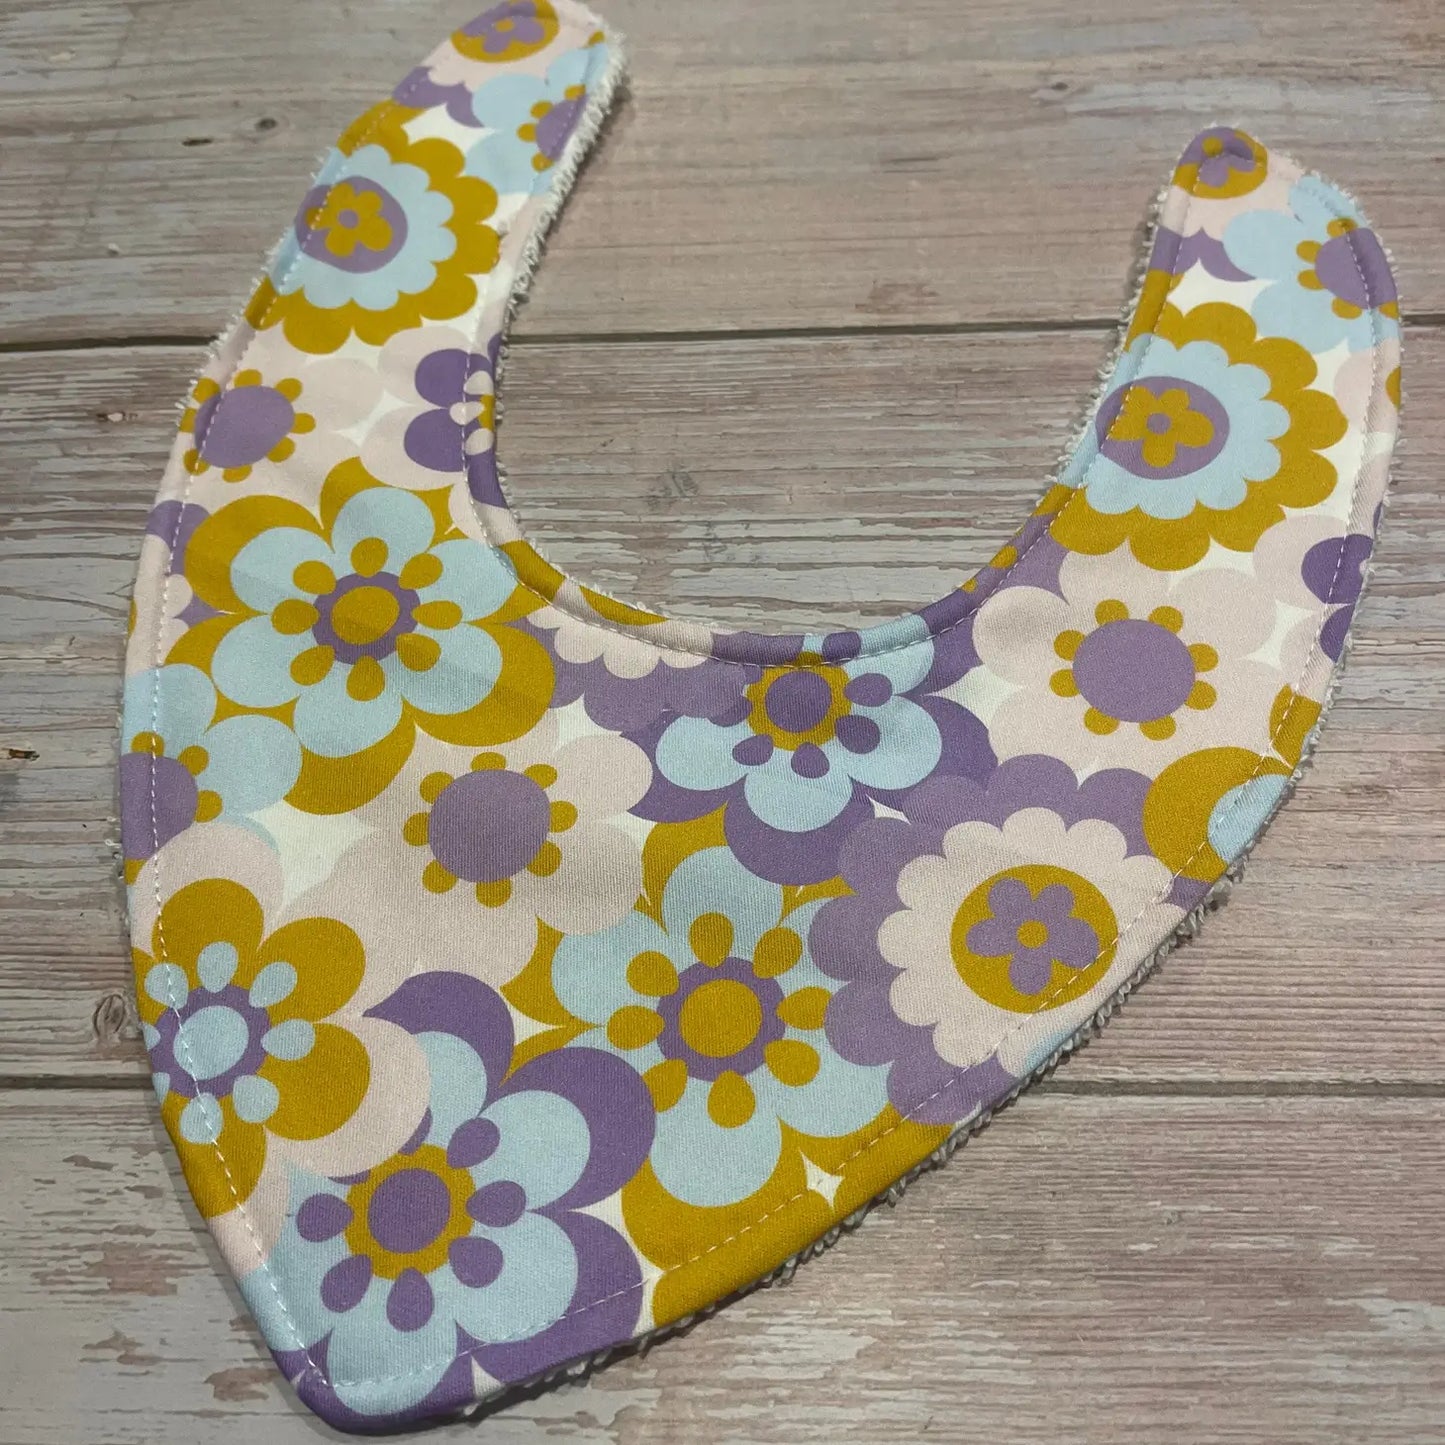 Handmade Bibs by Finished With a Kiss